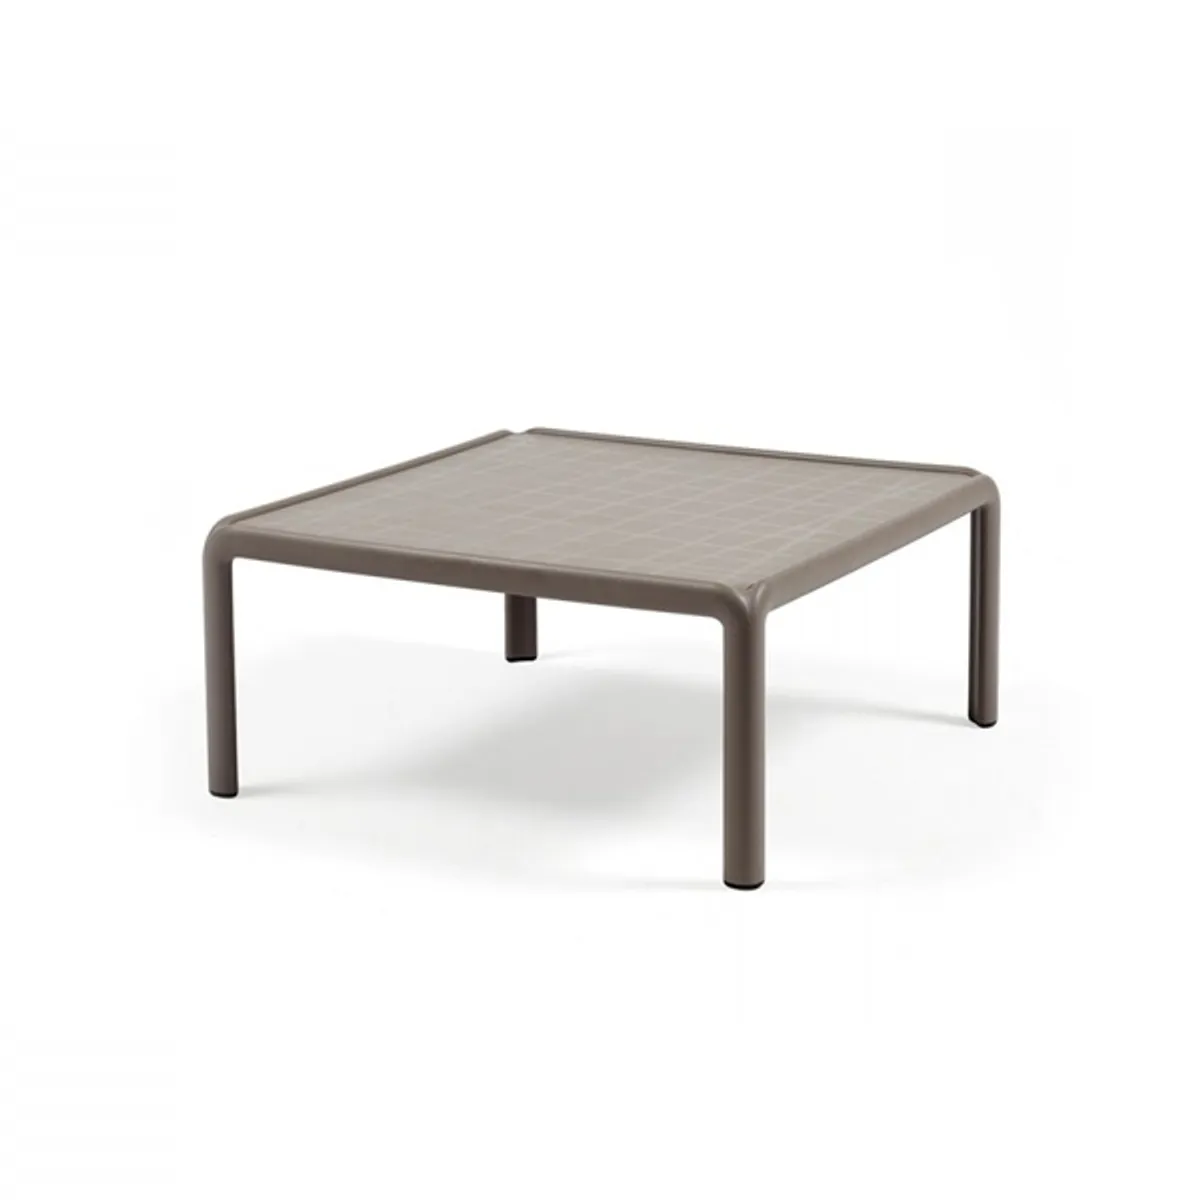 Komodo coffee table Inside Out Contracts2